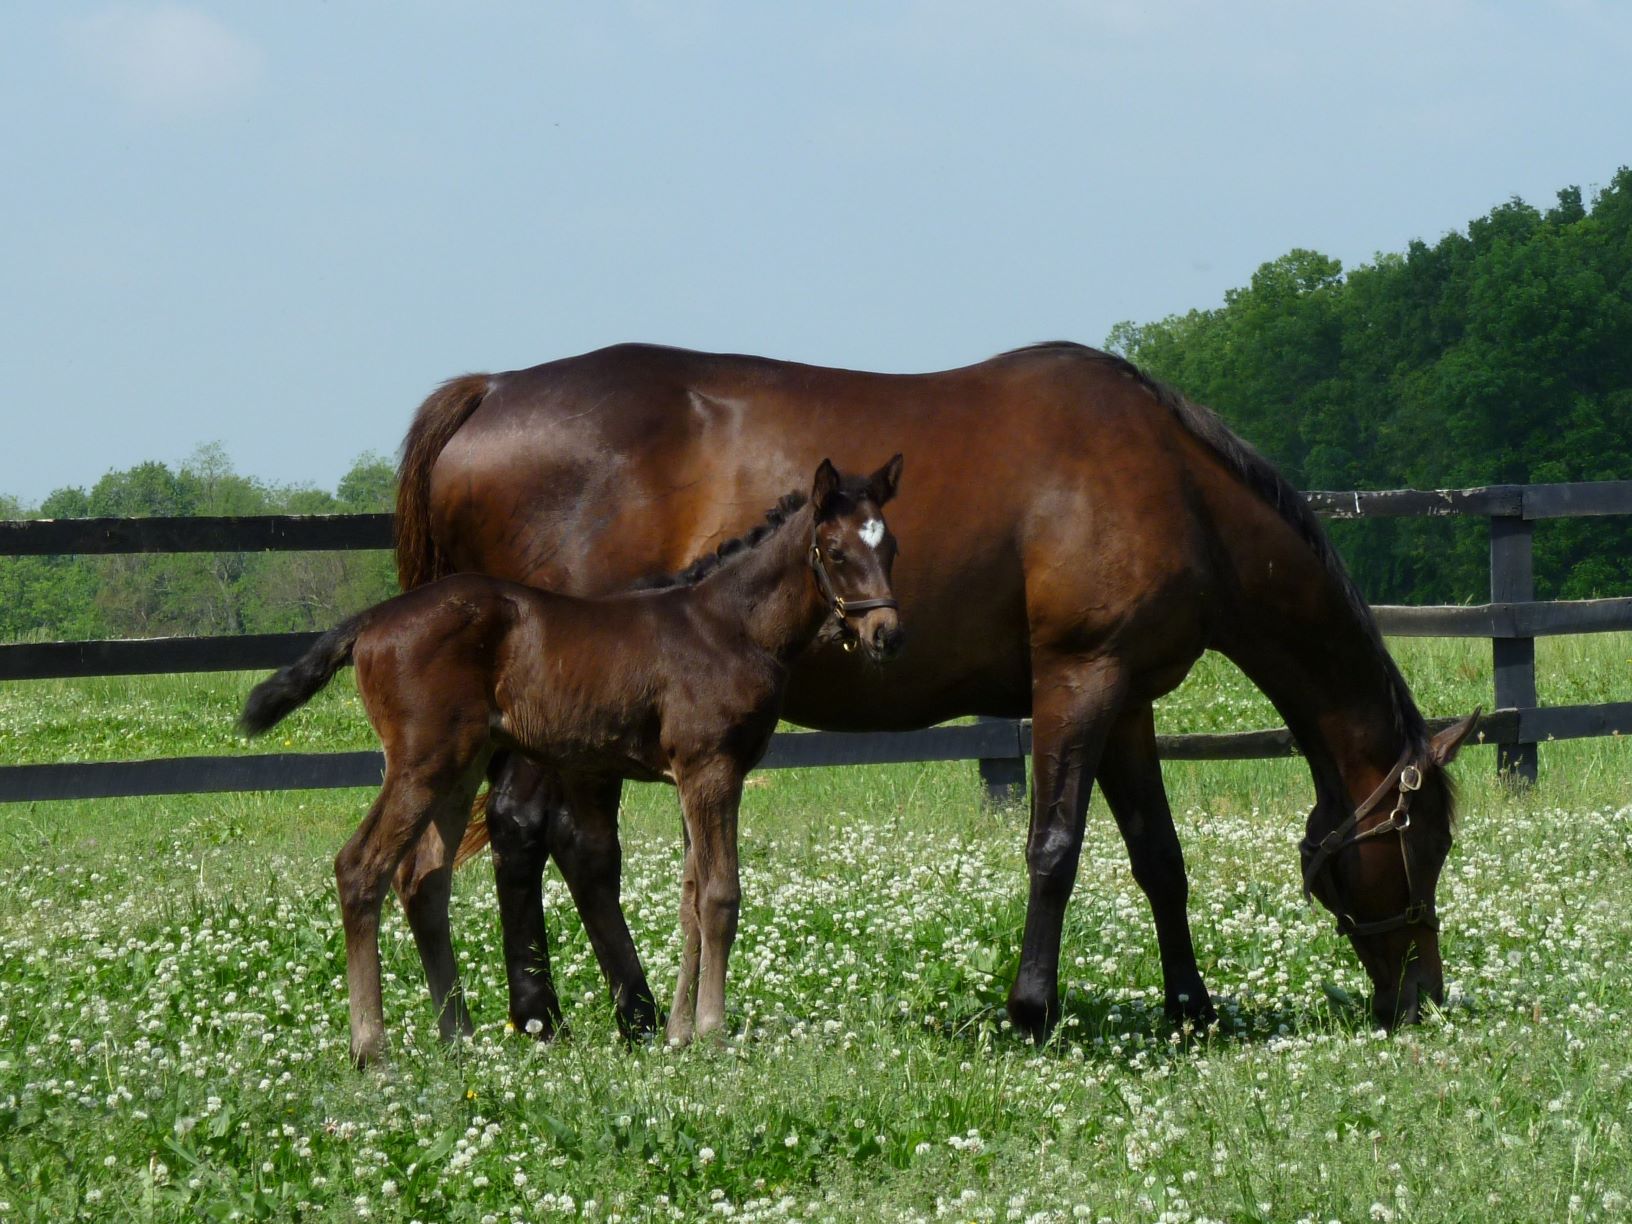 ES and Foal